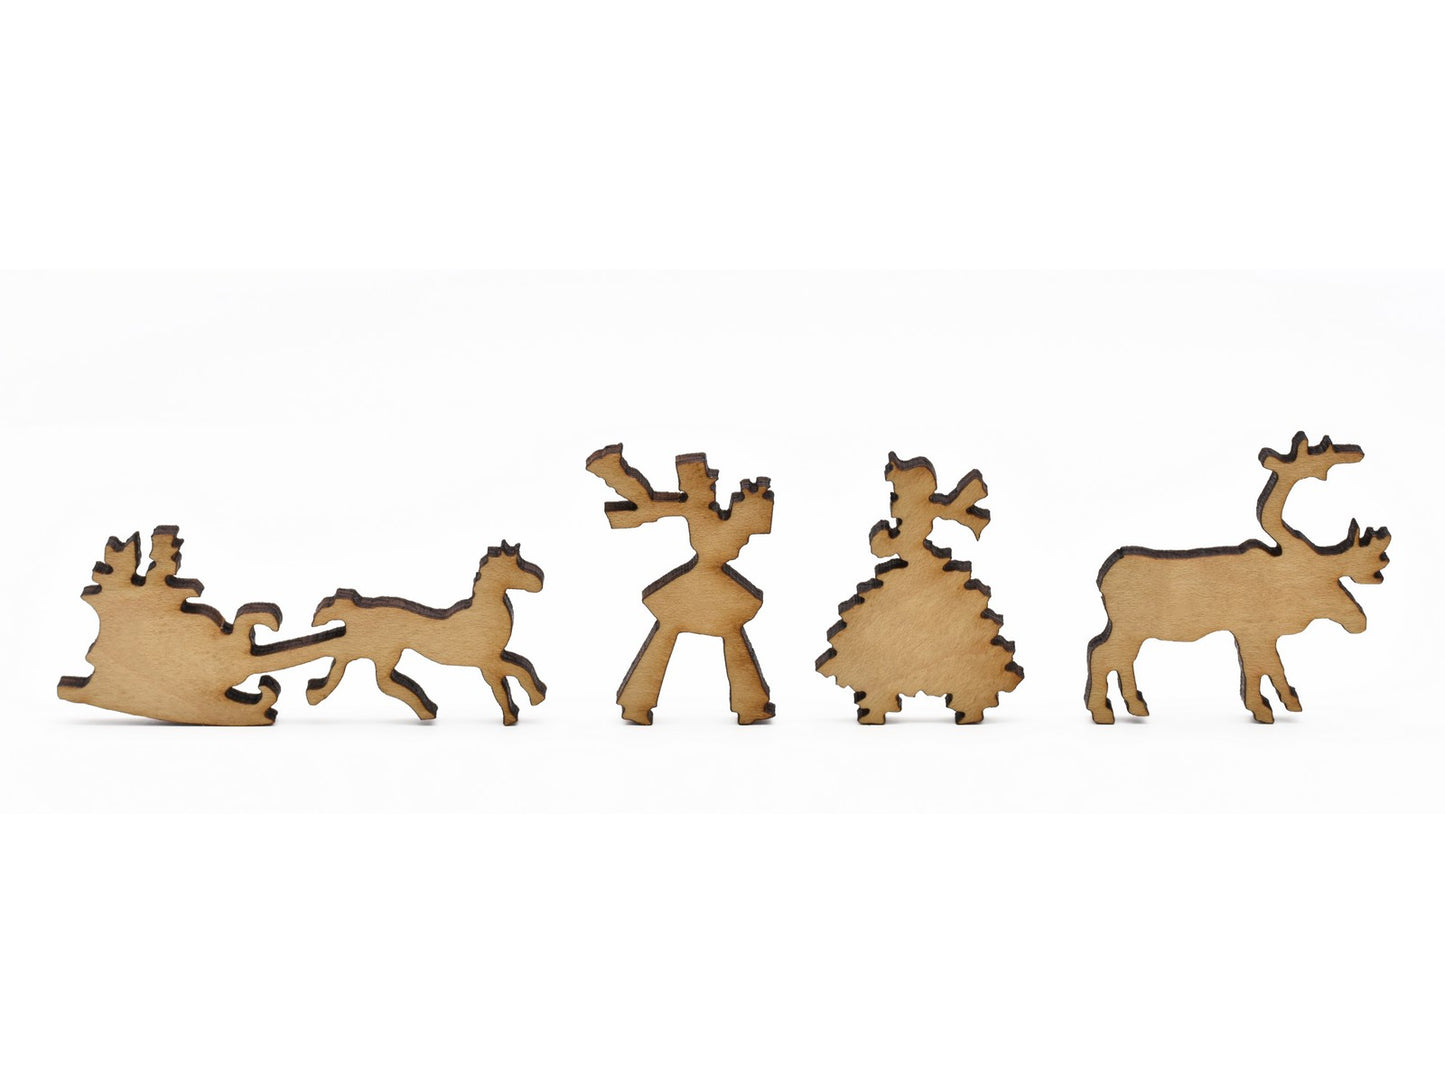 A closeup of pieces in the shape of a sleigh, a couple, and a reindeer.